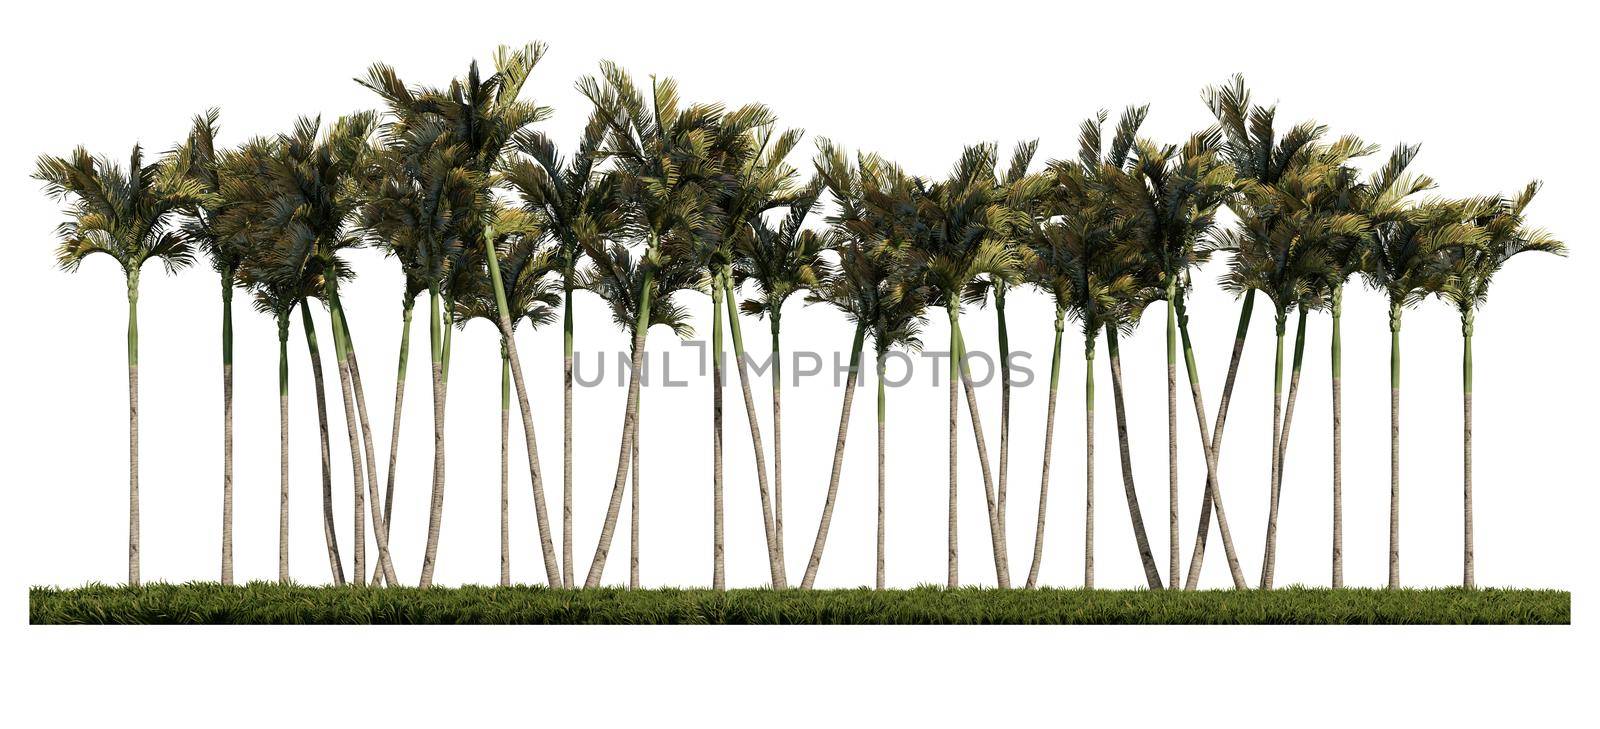 3ds rendering image of front view of palm trees on grasses field.